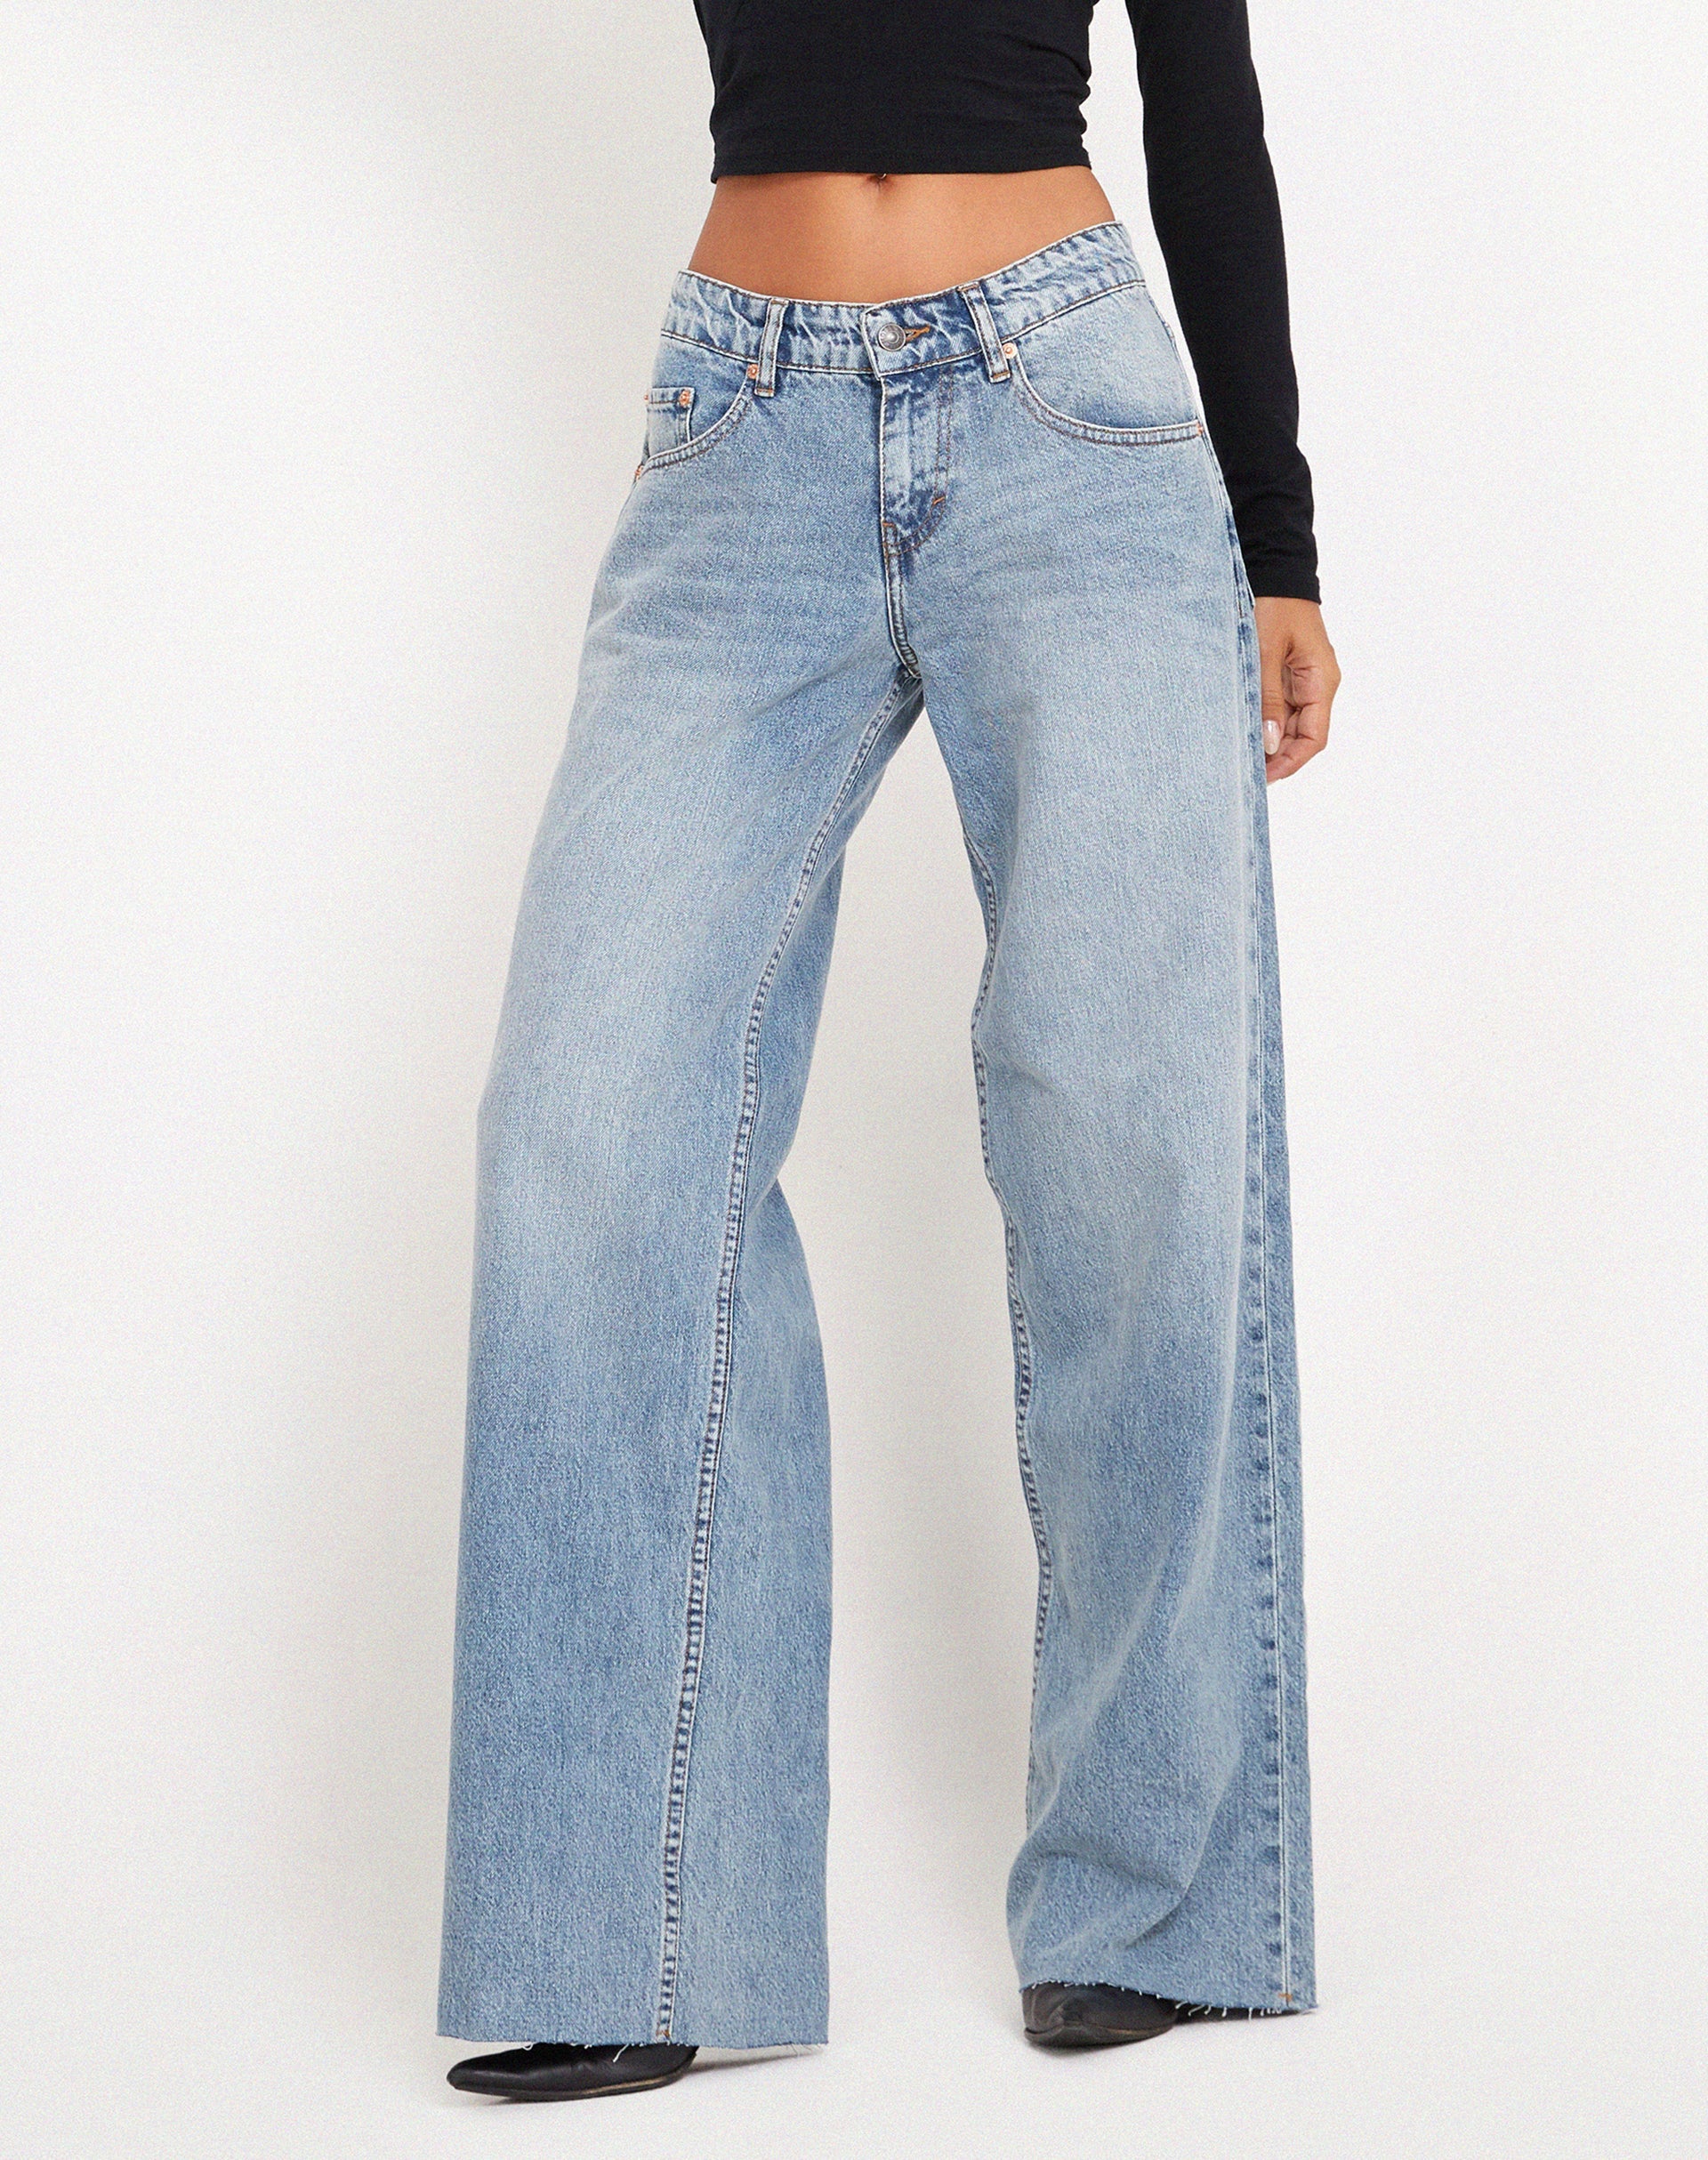 Penny Womens High Rise Bootleg Jean - Vintage Blue Wash